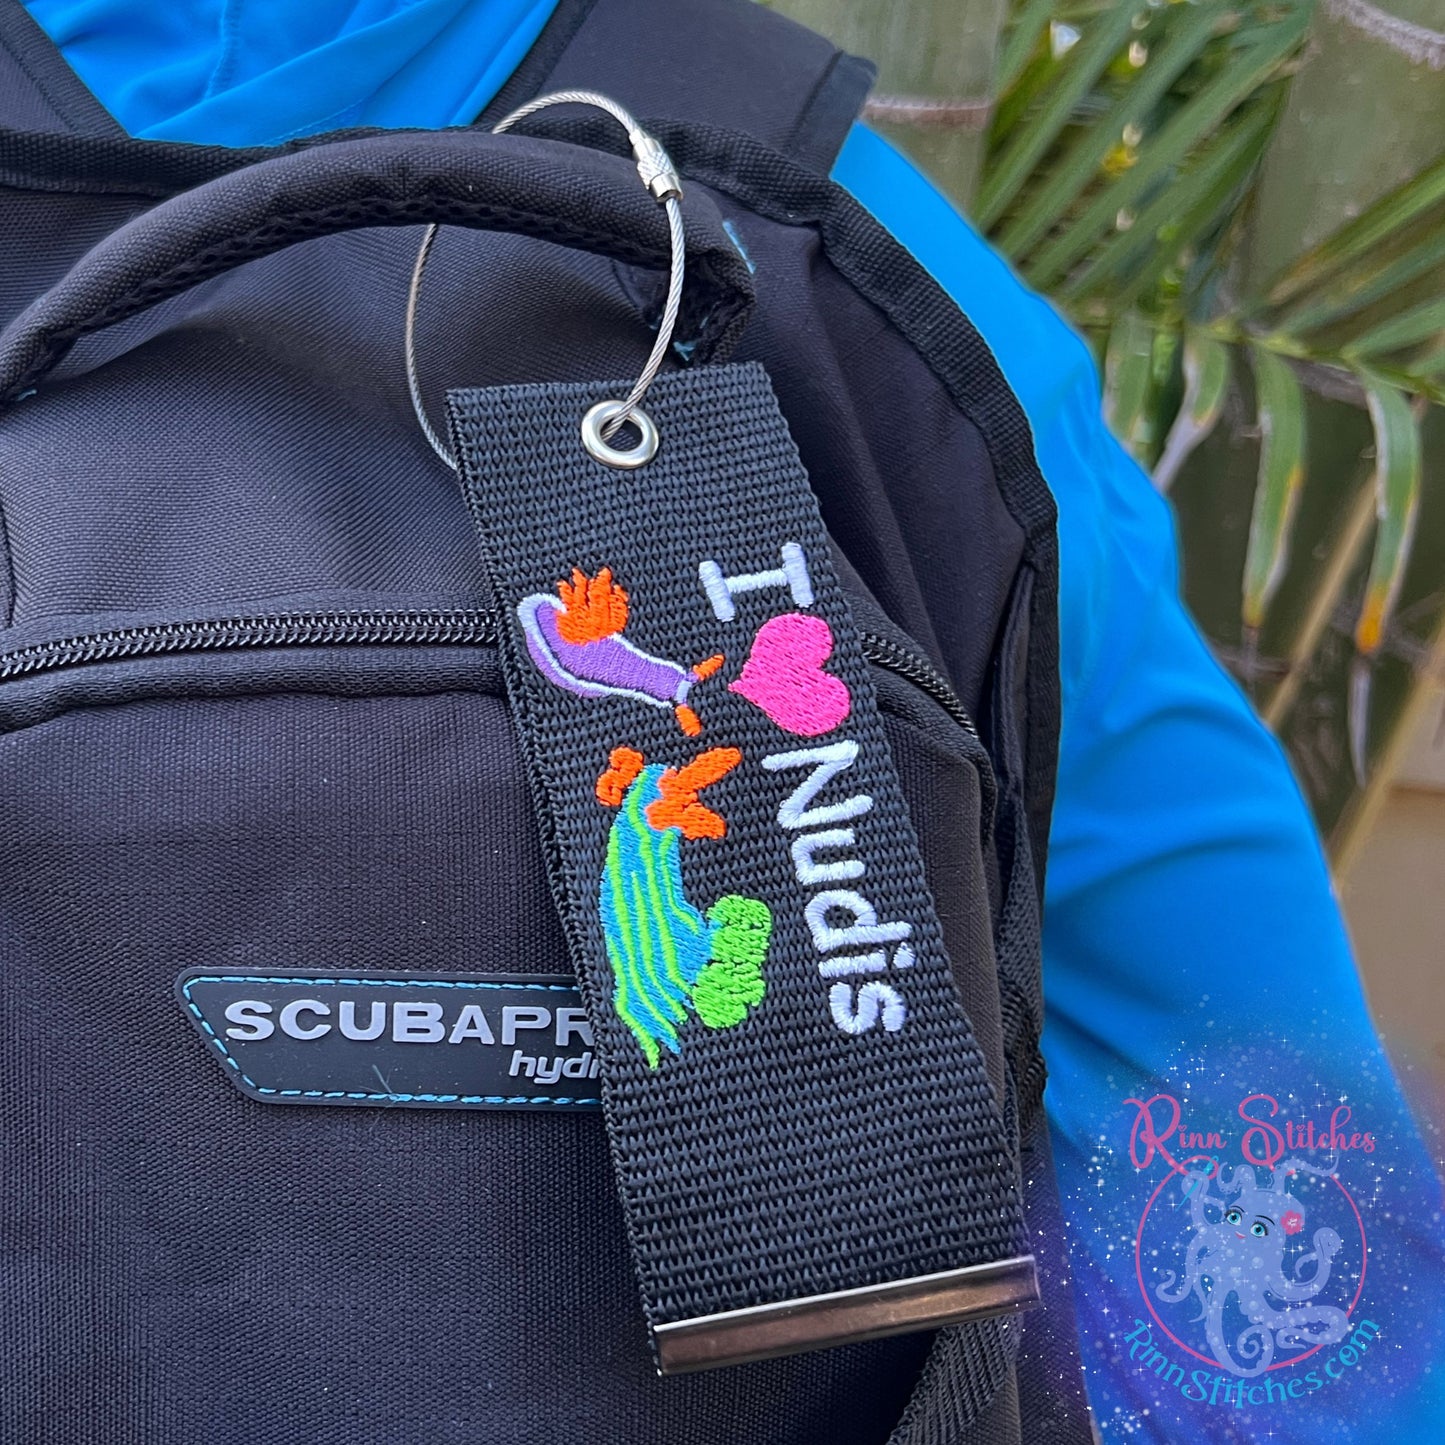 I ❤️ Nudis - Nudibranch Luggage Tag, Personalized Embroidered Bag Tag for all your Travel needs by Rinn Stitches on Maui, Hawaii